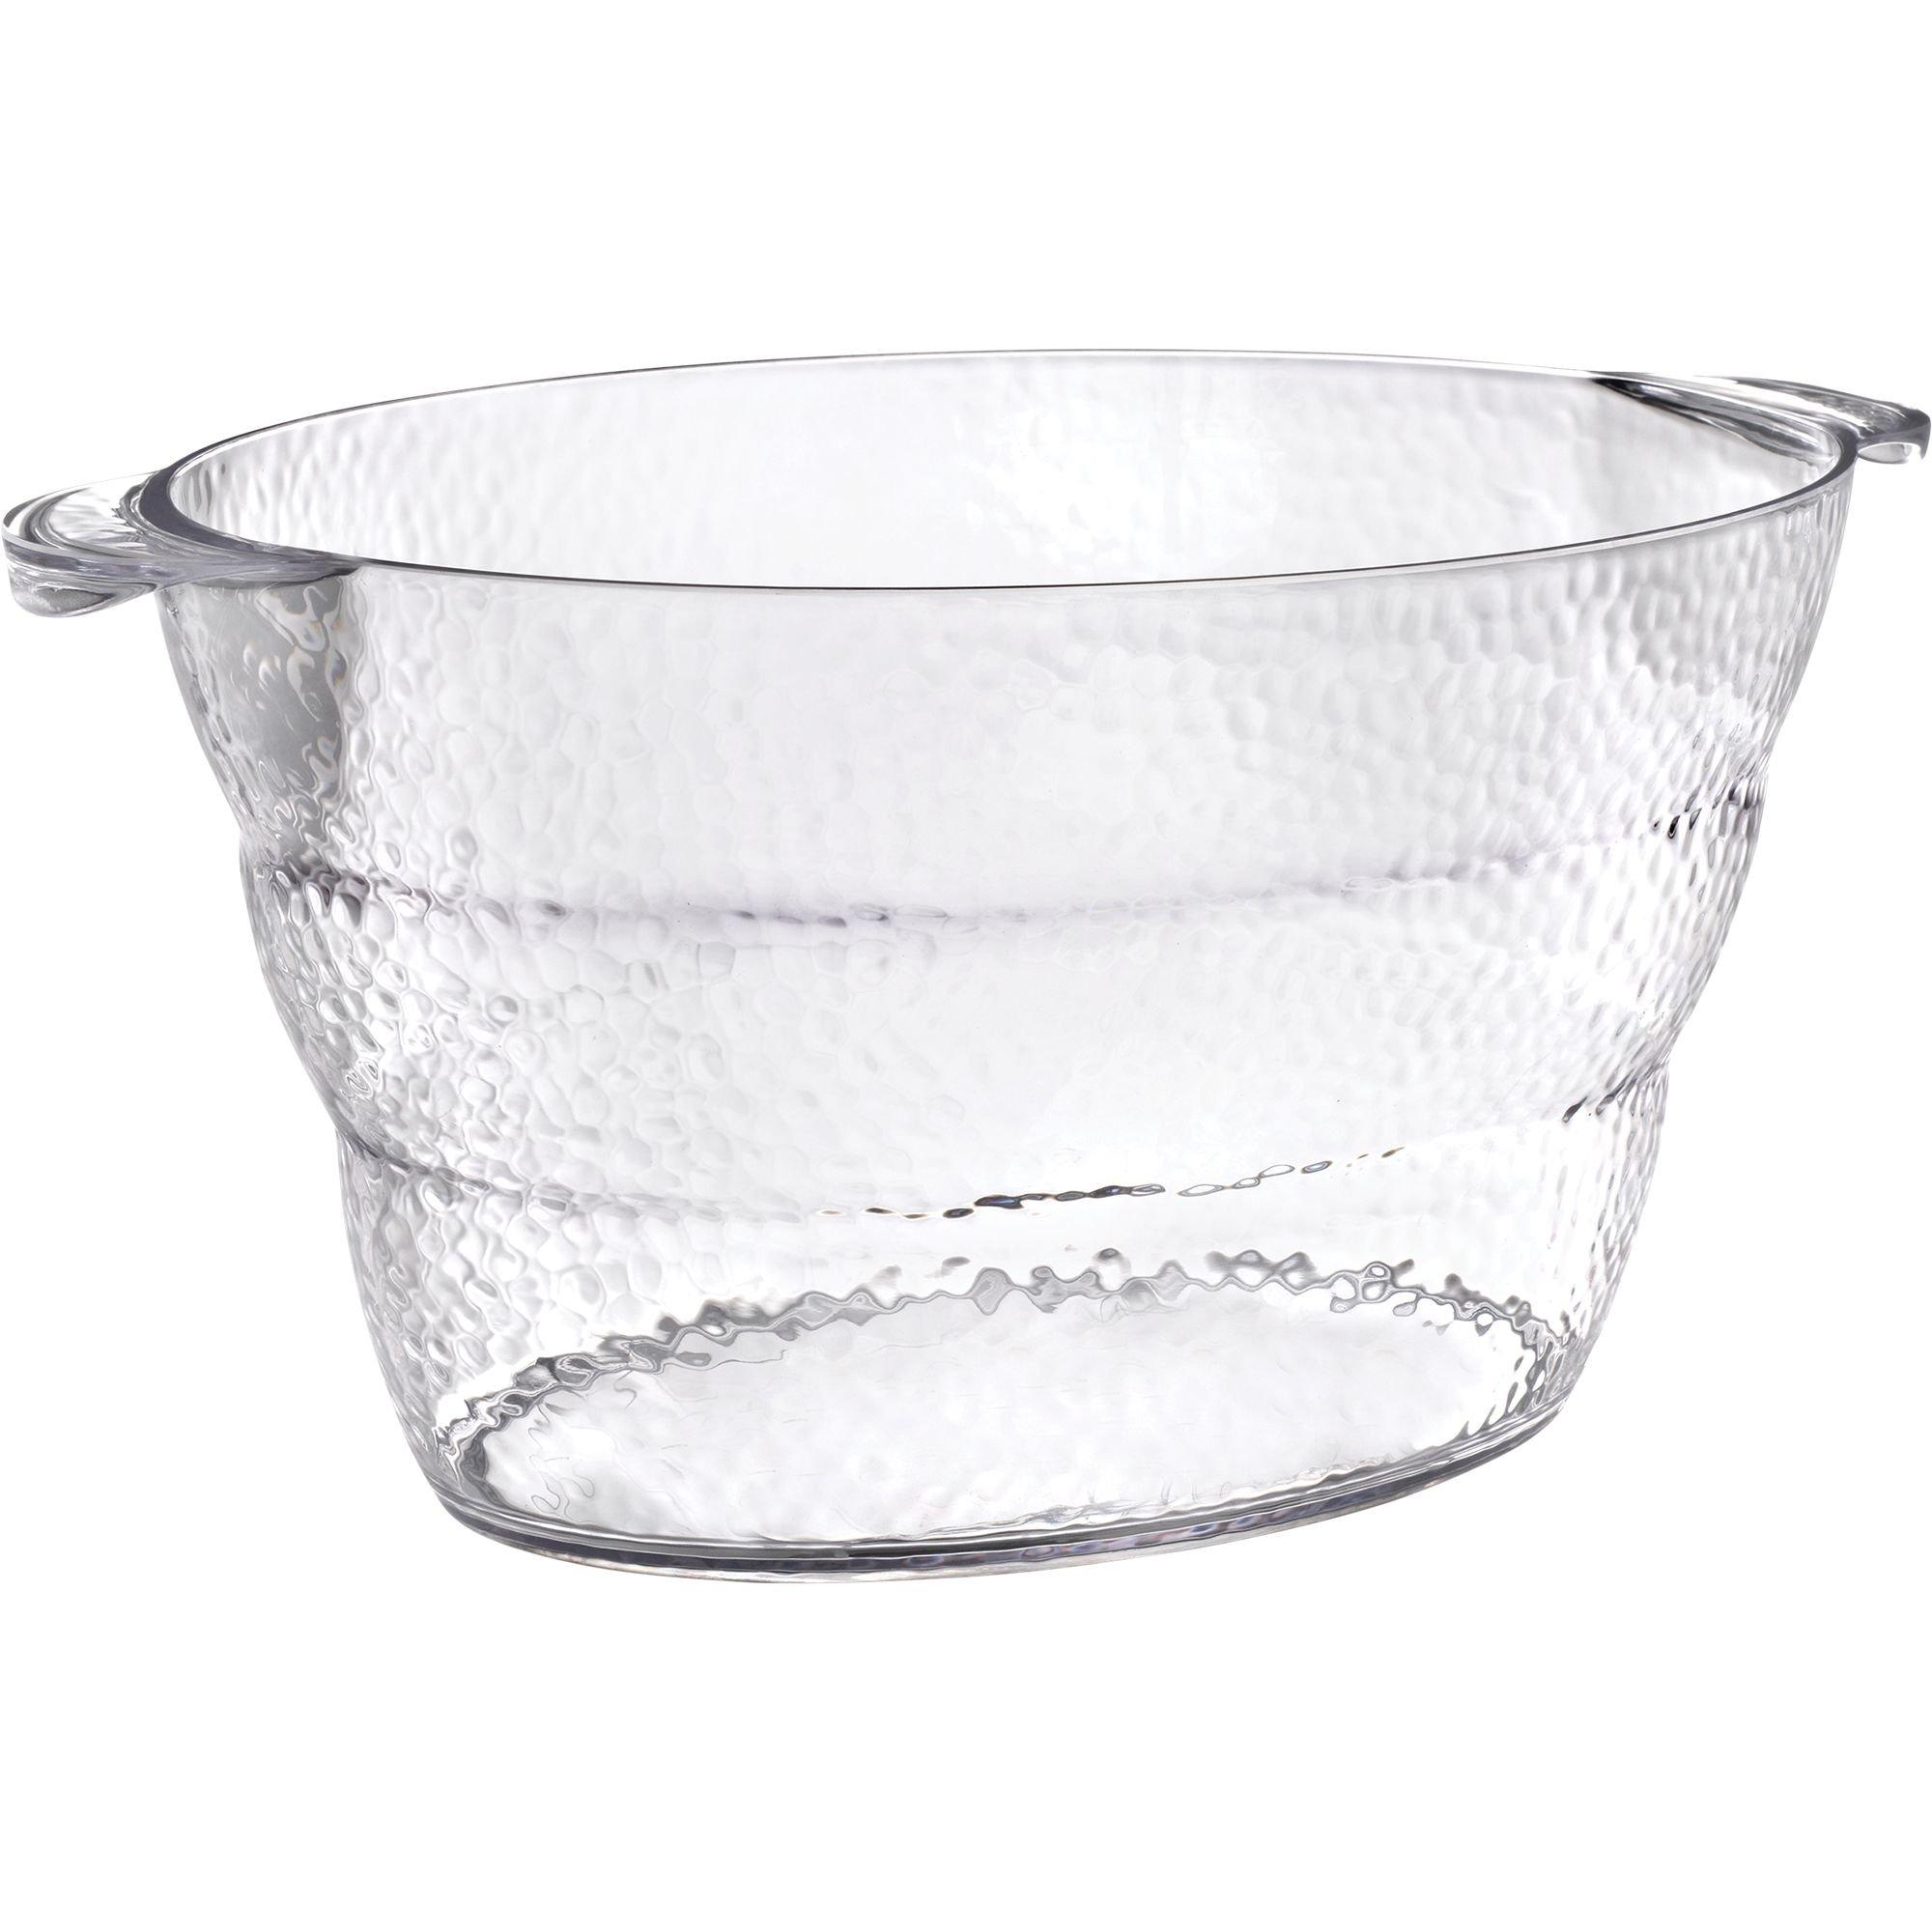 Clear Premium Plastic Hammered Oval Ice Bucket 11in x 18 1/2in